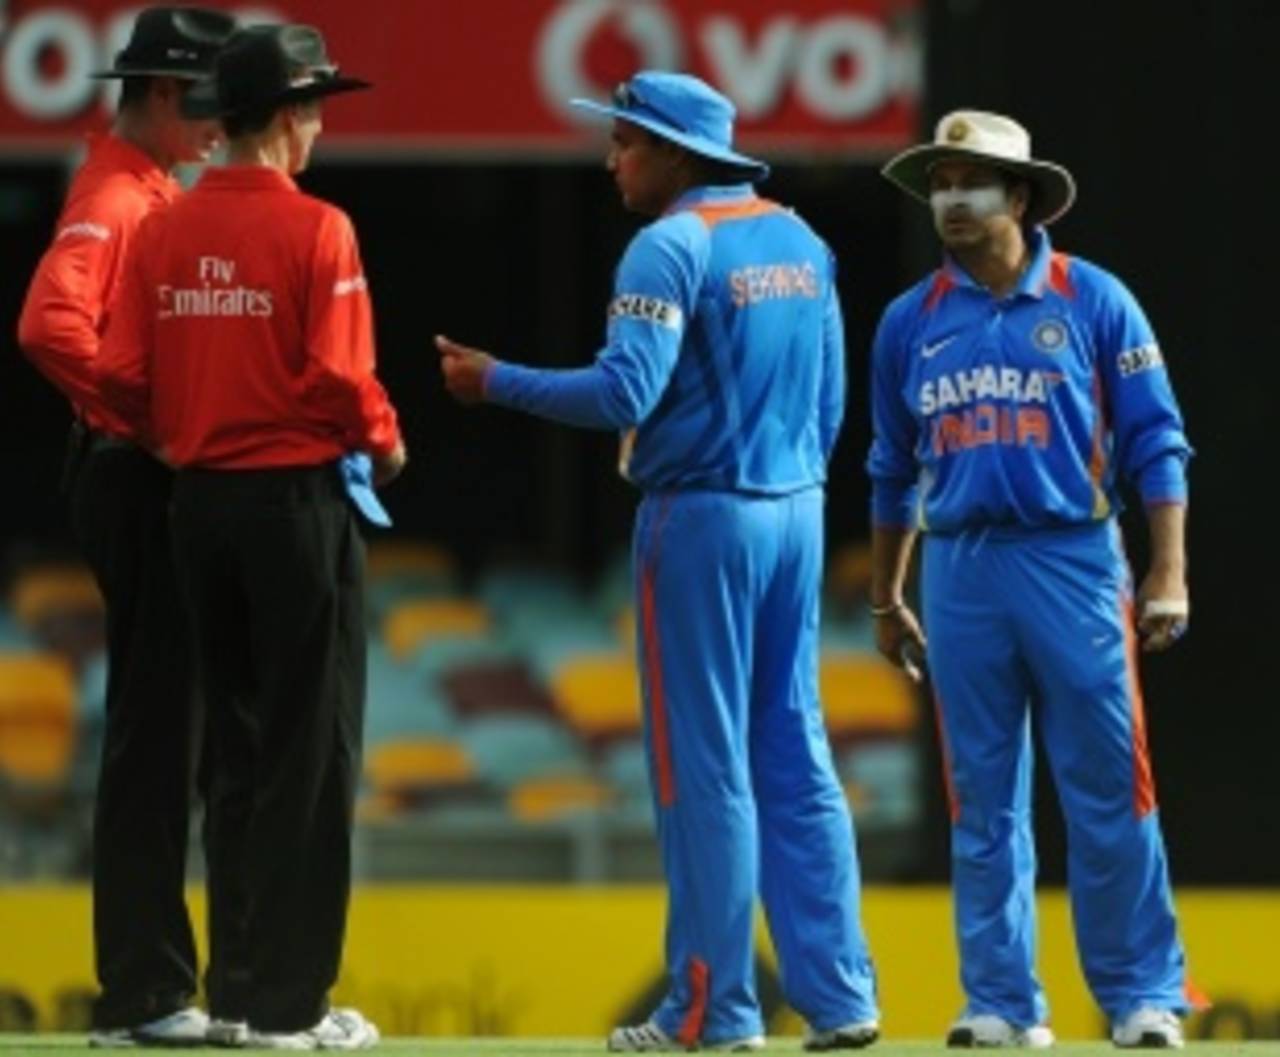 Virender Sehwag withdrew R Ashwin's appeal for a run-out against Lahiru Thirimanne, who was backing up too far at the non-striker's end before the bowler delivered the ball, India v Sri Lanka, CB Series, Brisbane, February 21, 2012